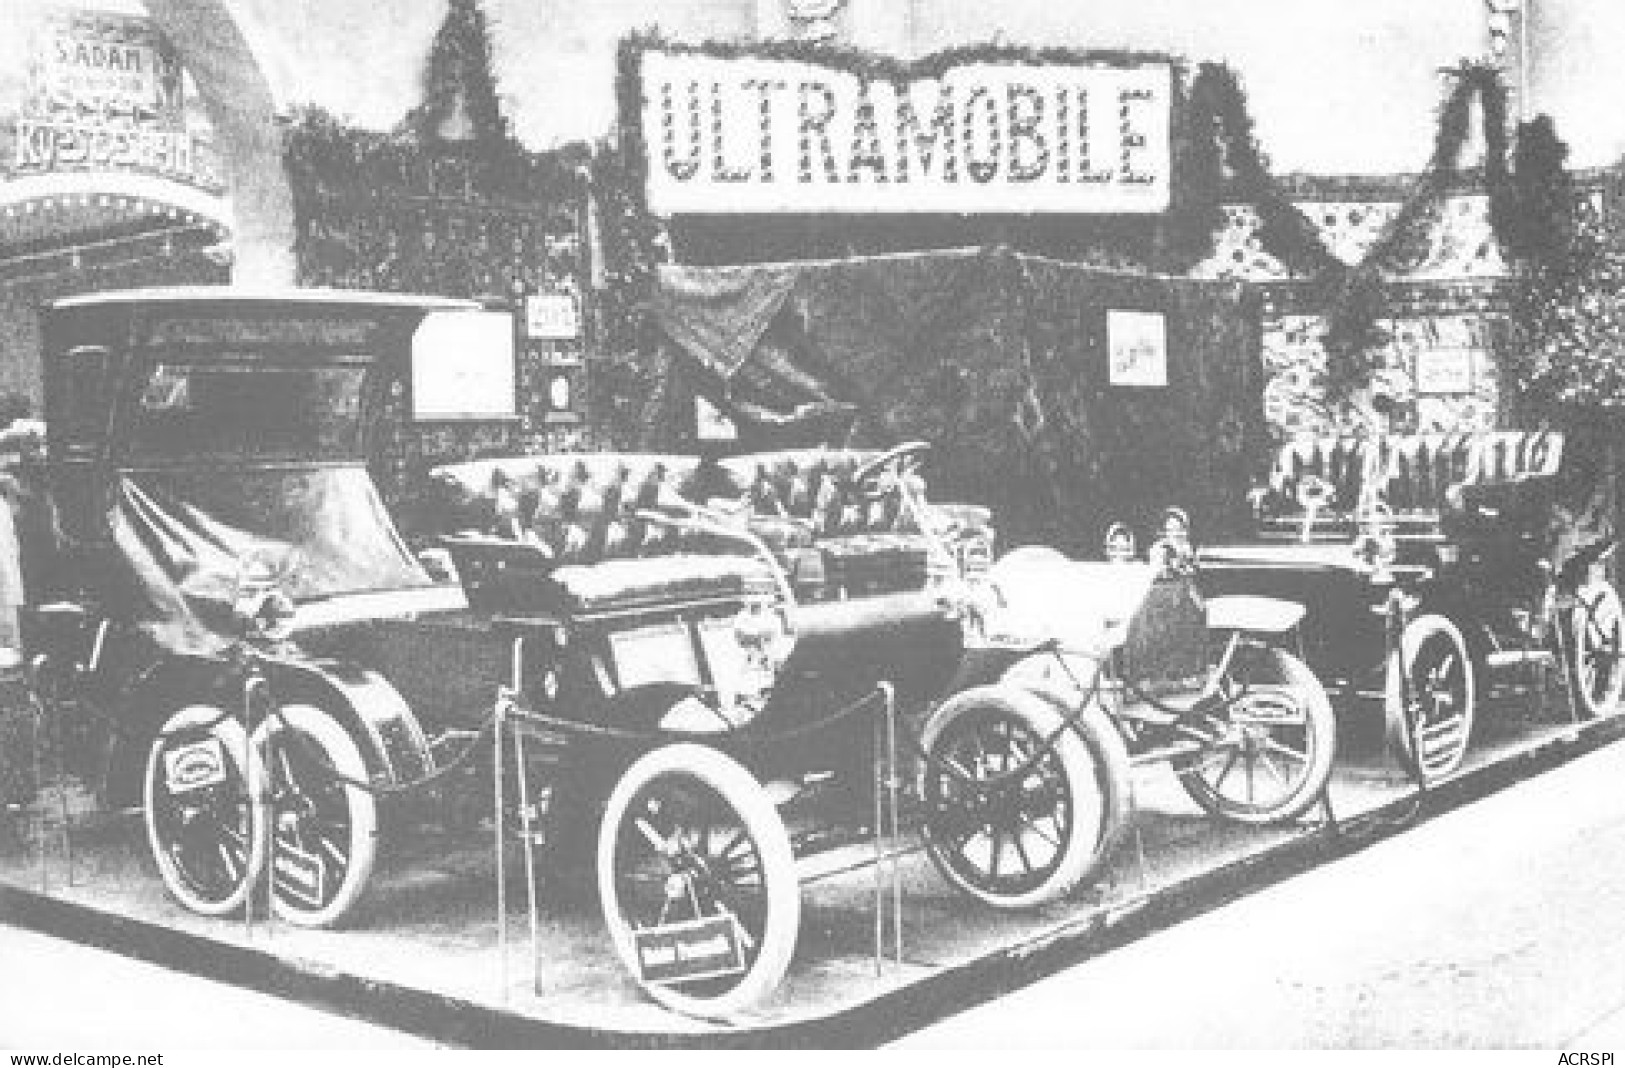 AUTOMOBILES  ULTRAMOBILE  Voiture  59 (scan Recto-verso)MA2174Ter - PKW